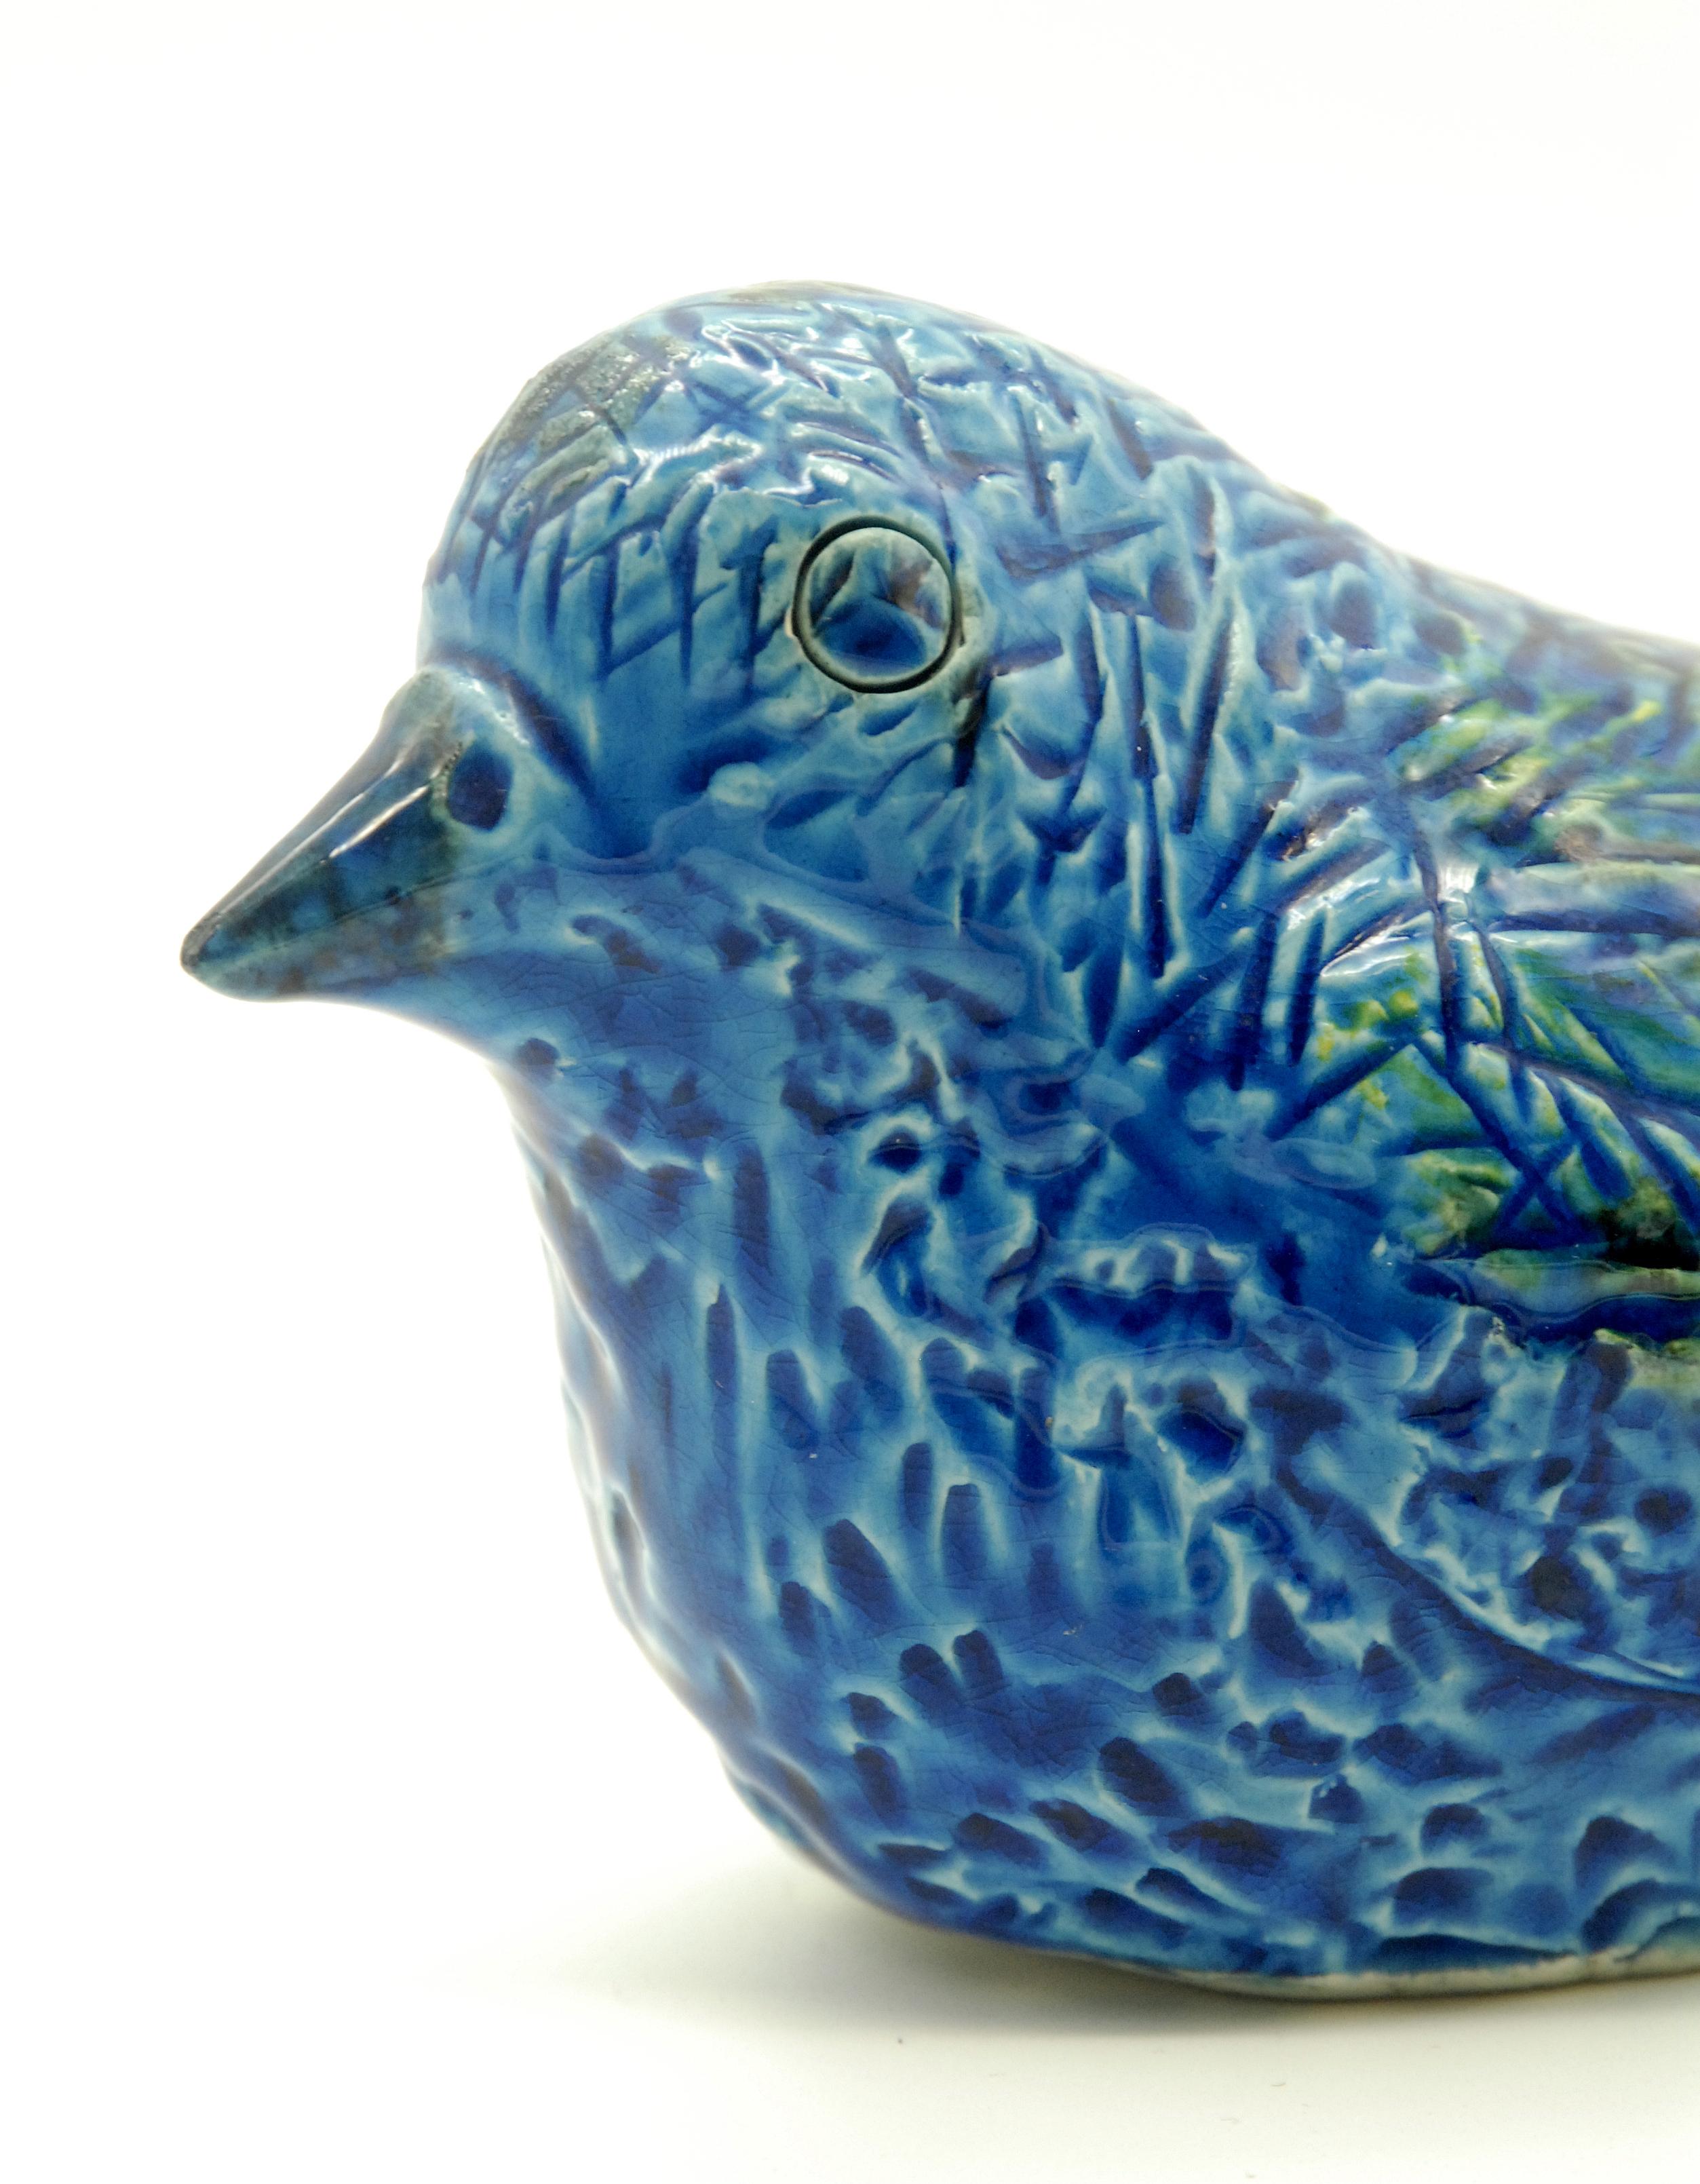 A late 1960s-1970s blue glazed bird, designed in 1963, with scraffito lines mimicking feathers under the glaze, with original paper label.